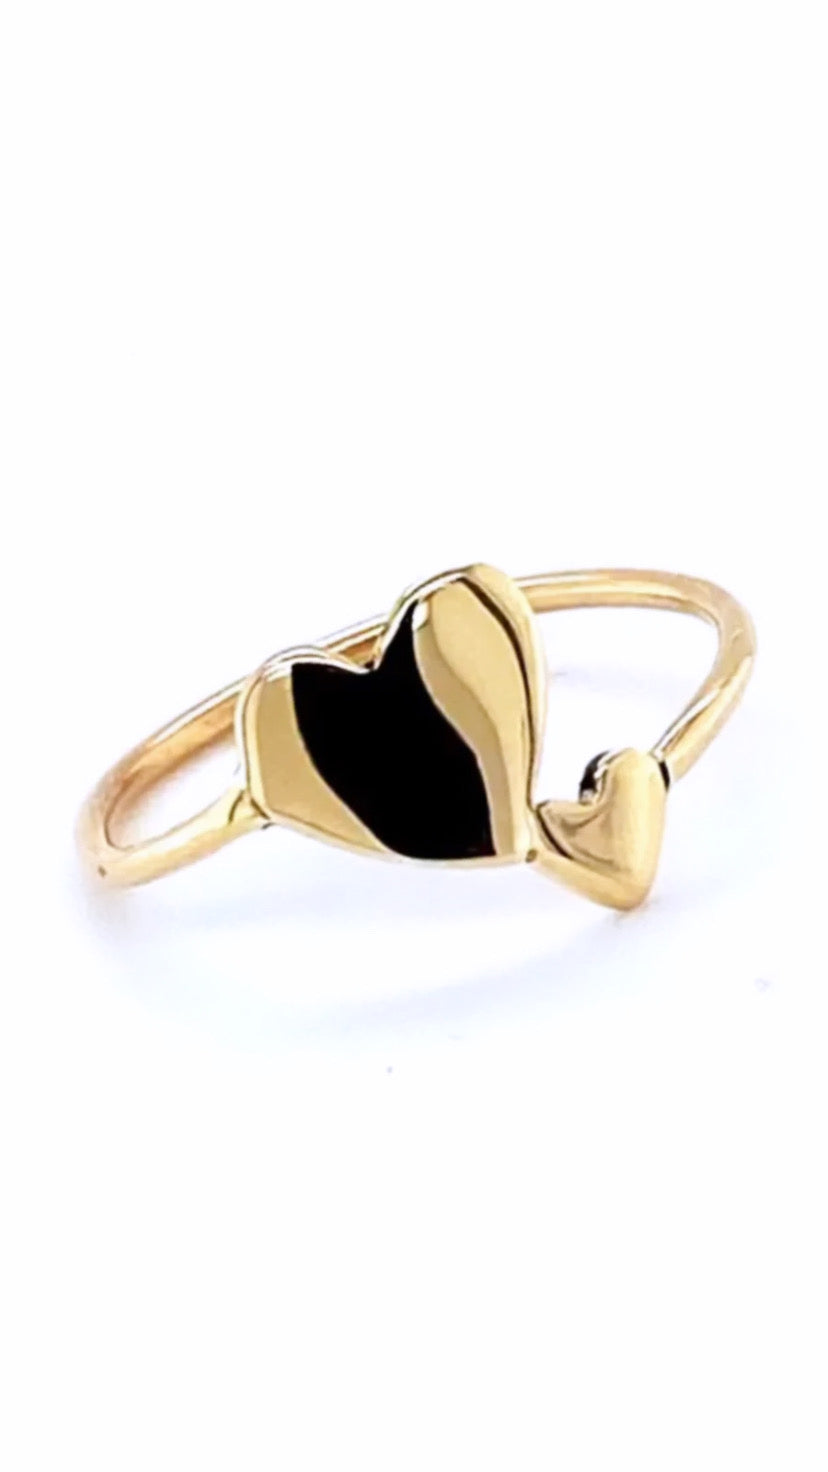 DOUBLE LOVE HEART RING CAST IN 9CT GOLD